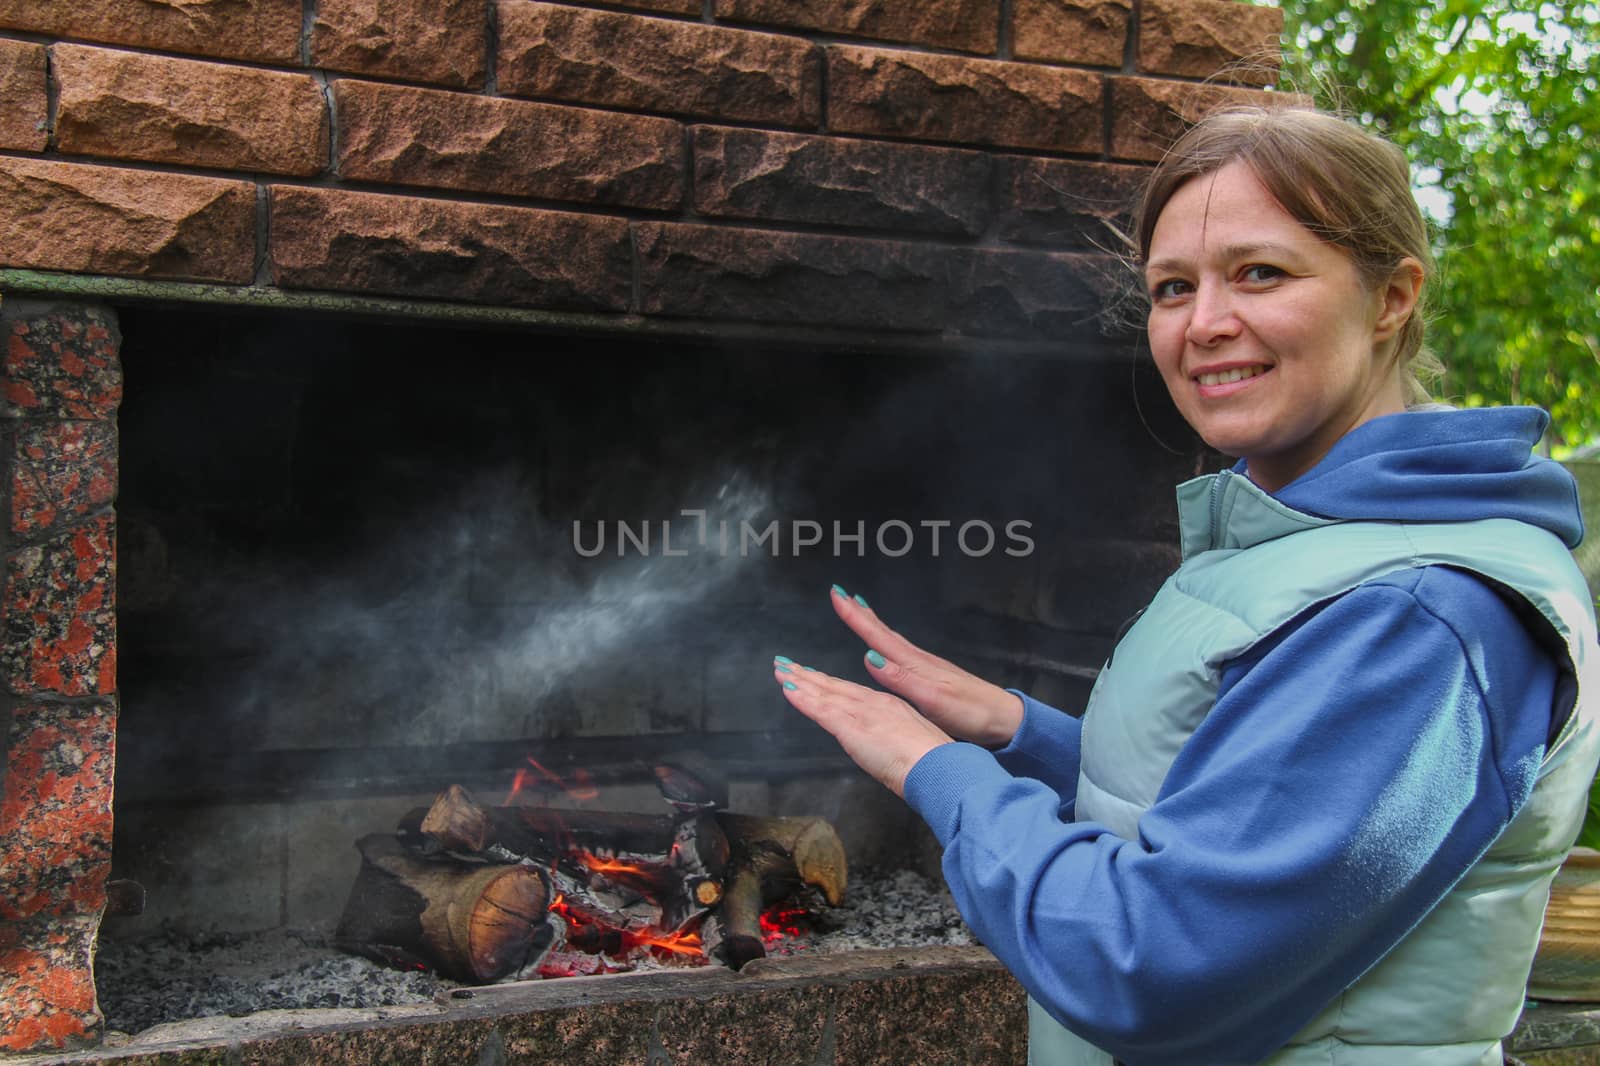 Woman warming hands near the fireplace at outdoor